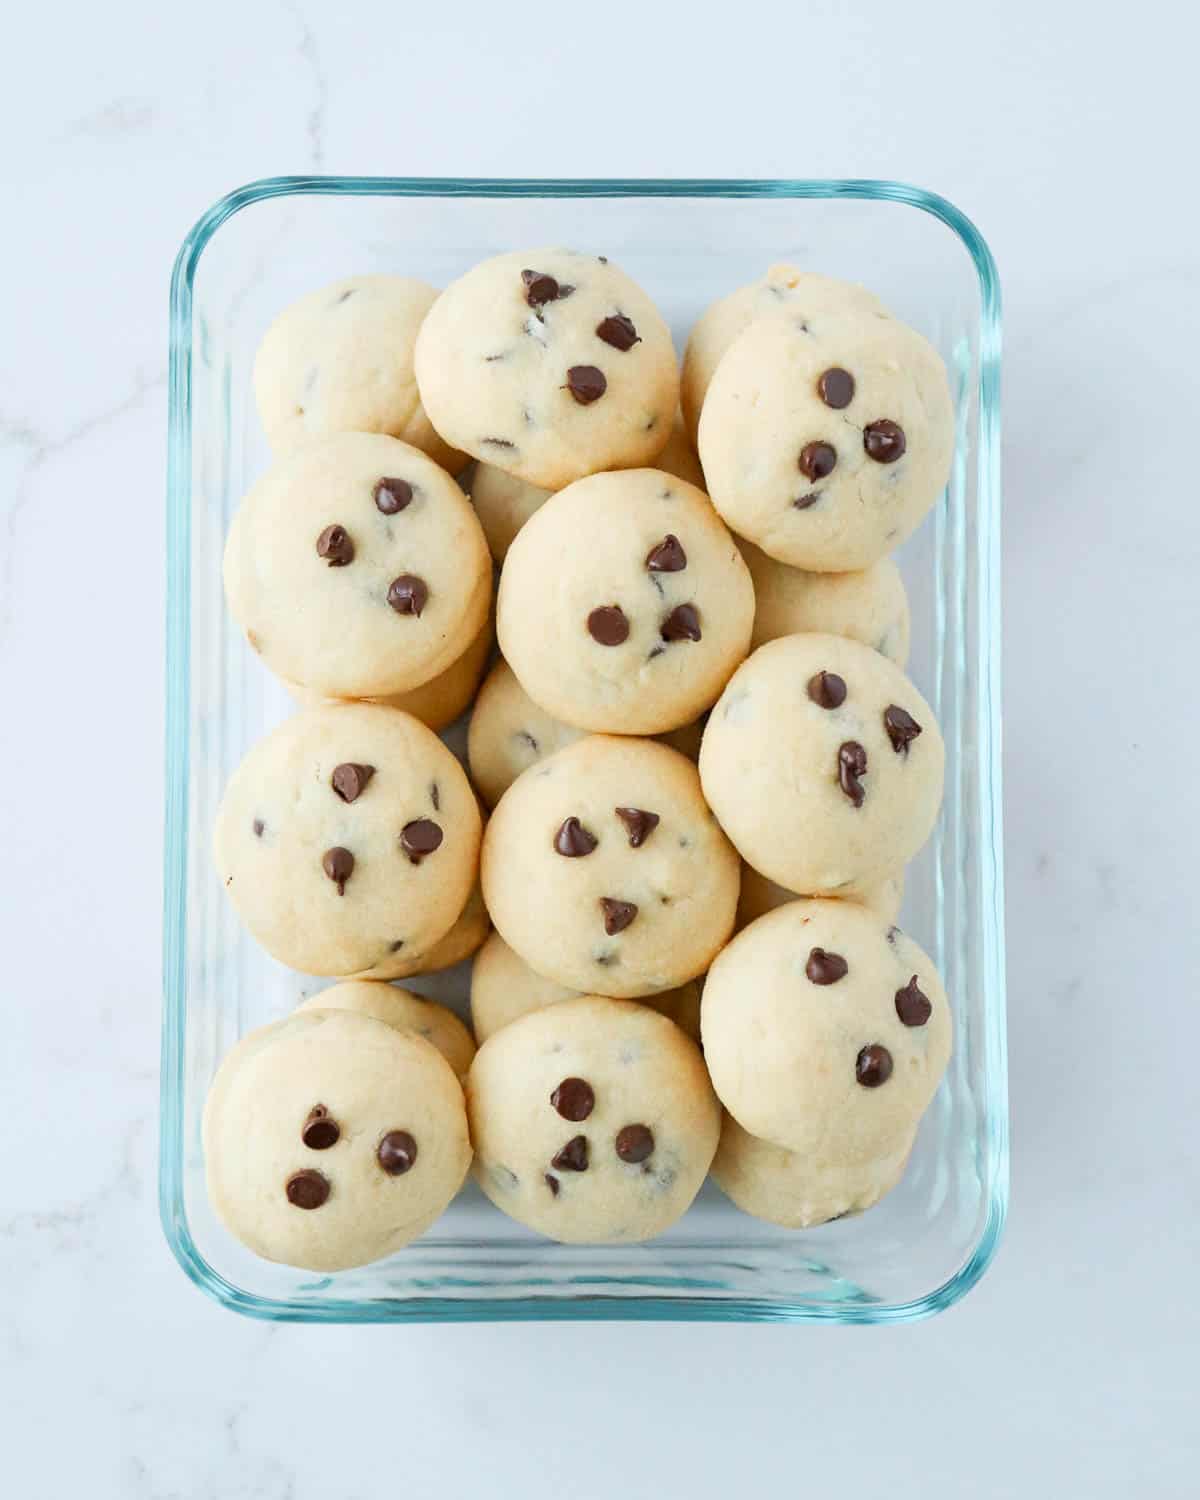 Shortbread cookies with chocolate chips in a glass storage container.